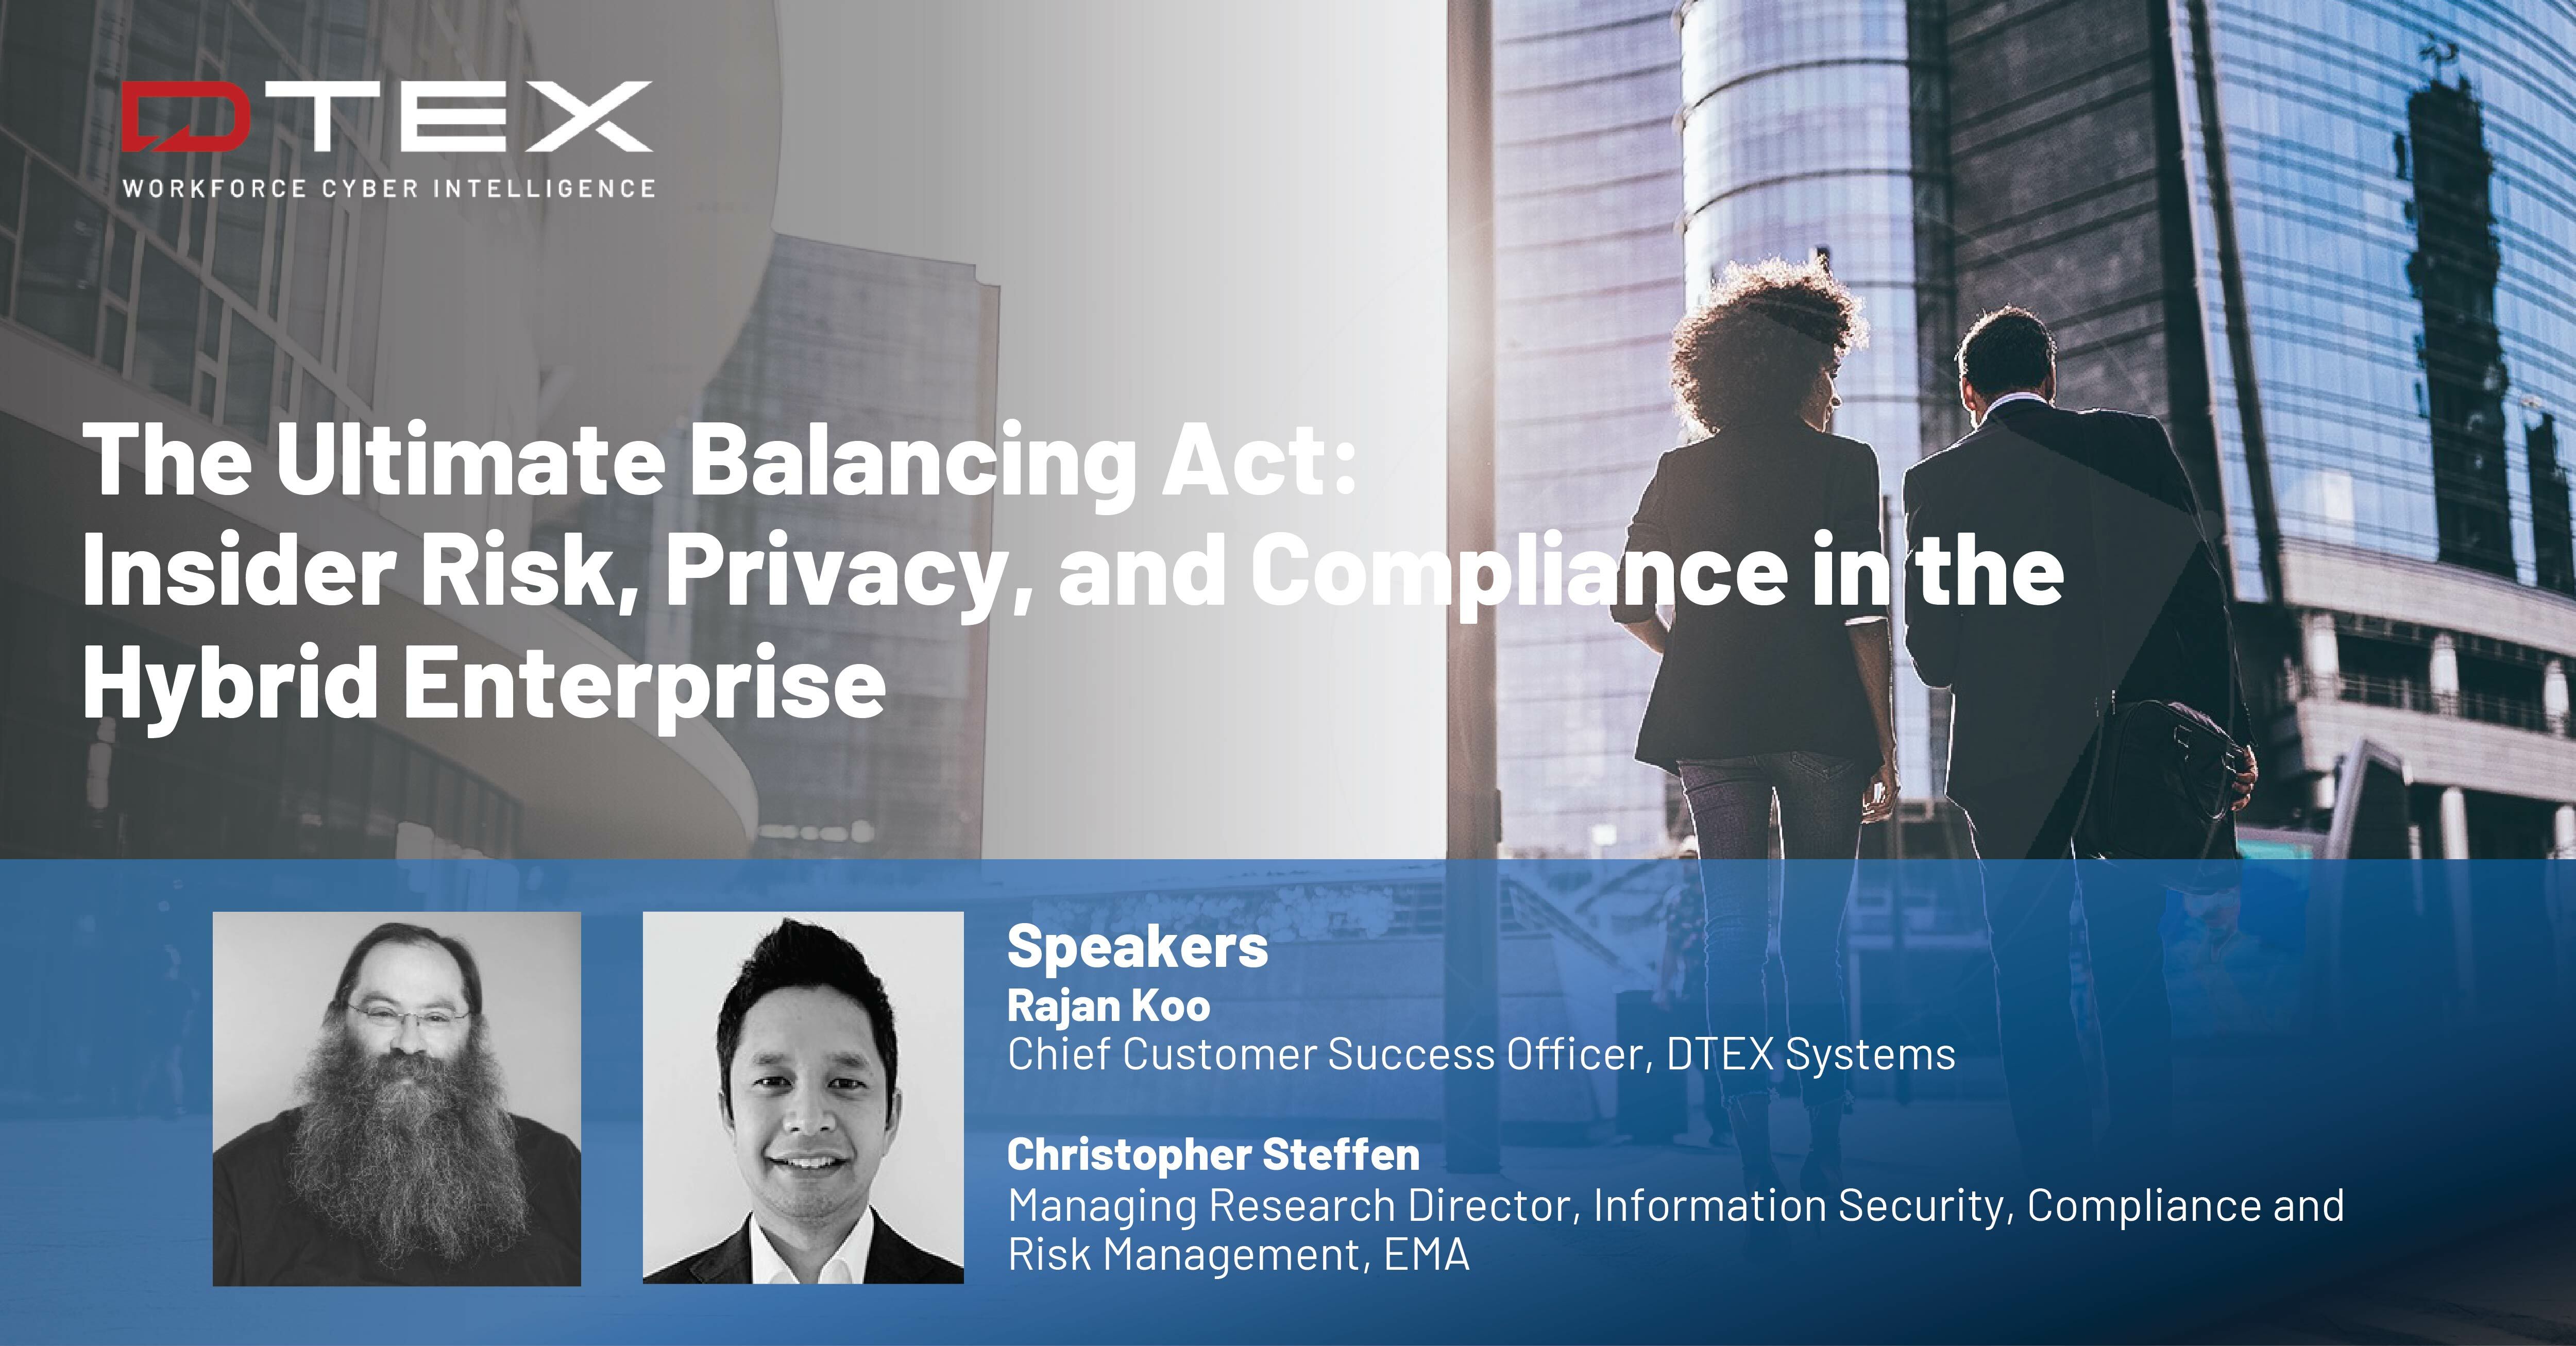 The Ultimate Balancing Act: Insider Risk, Privacy, and Compliance in the Hybrid Enterprise